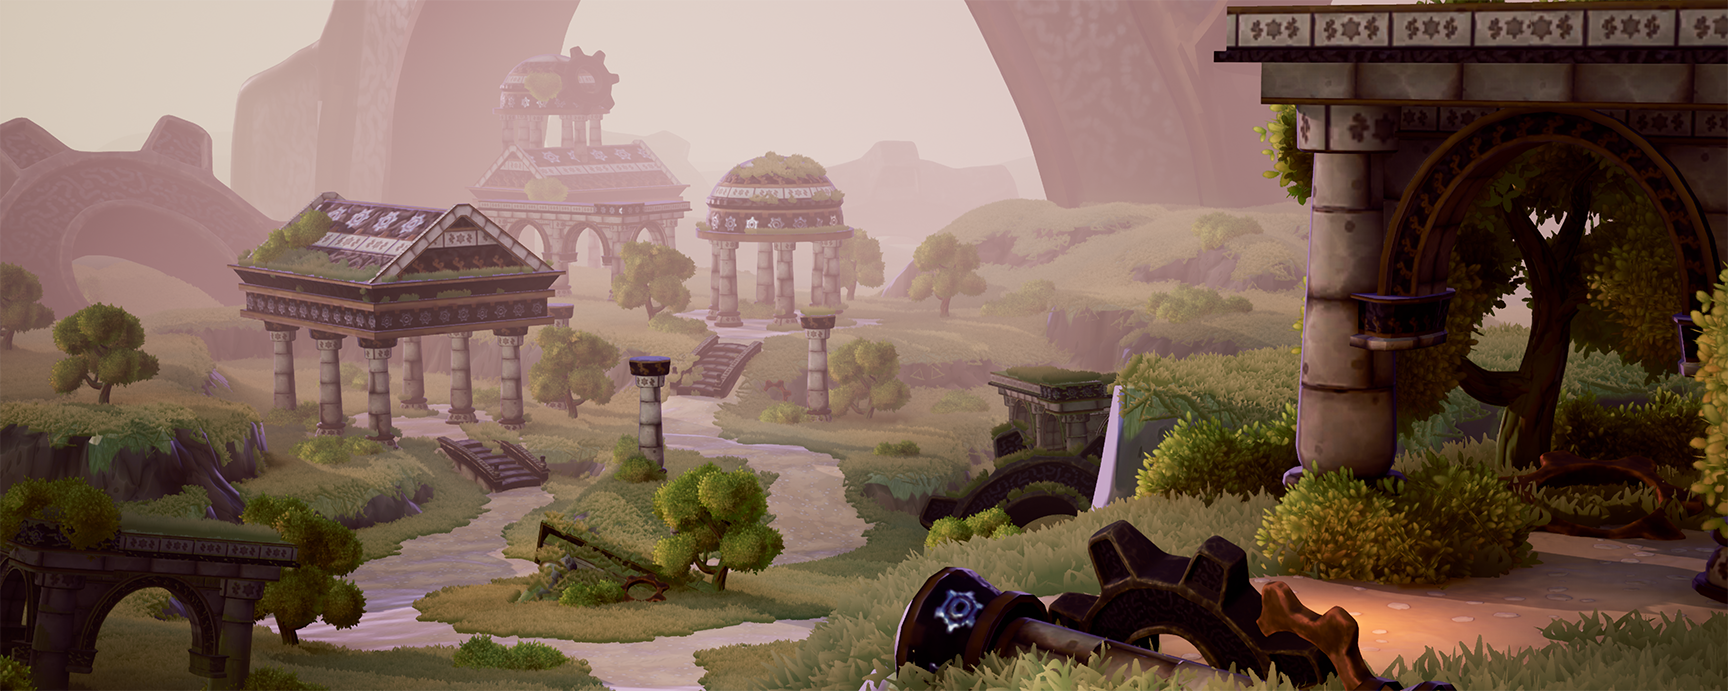 BA Games Art & Design UE4 game environment by George Cutler showing overgrown ruins, trees and giant mythical gears.